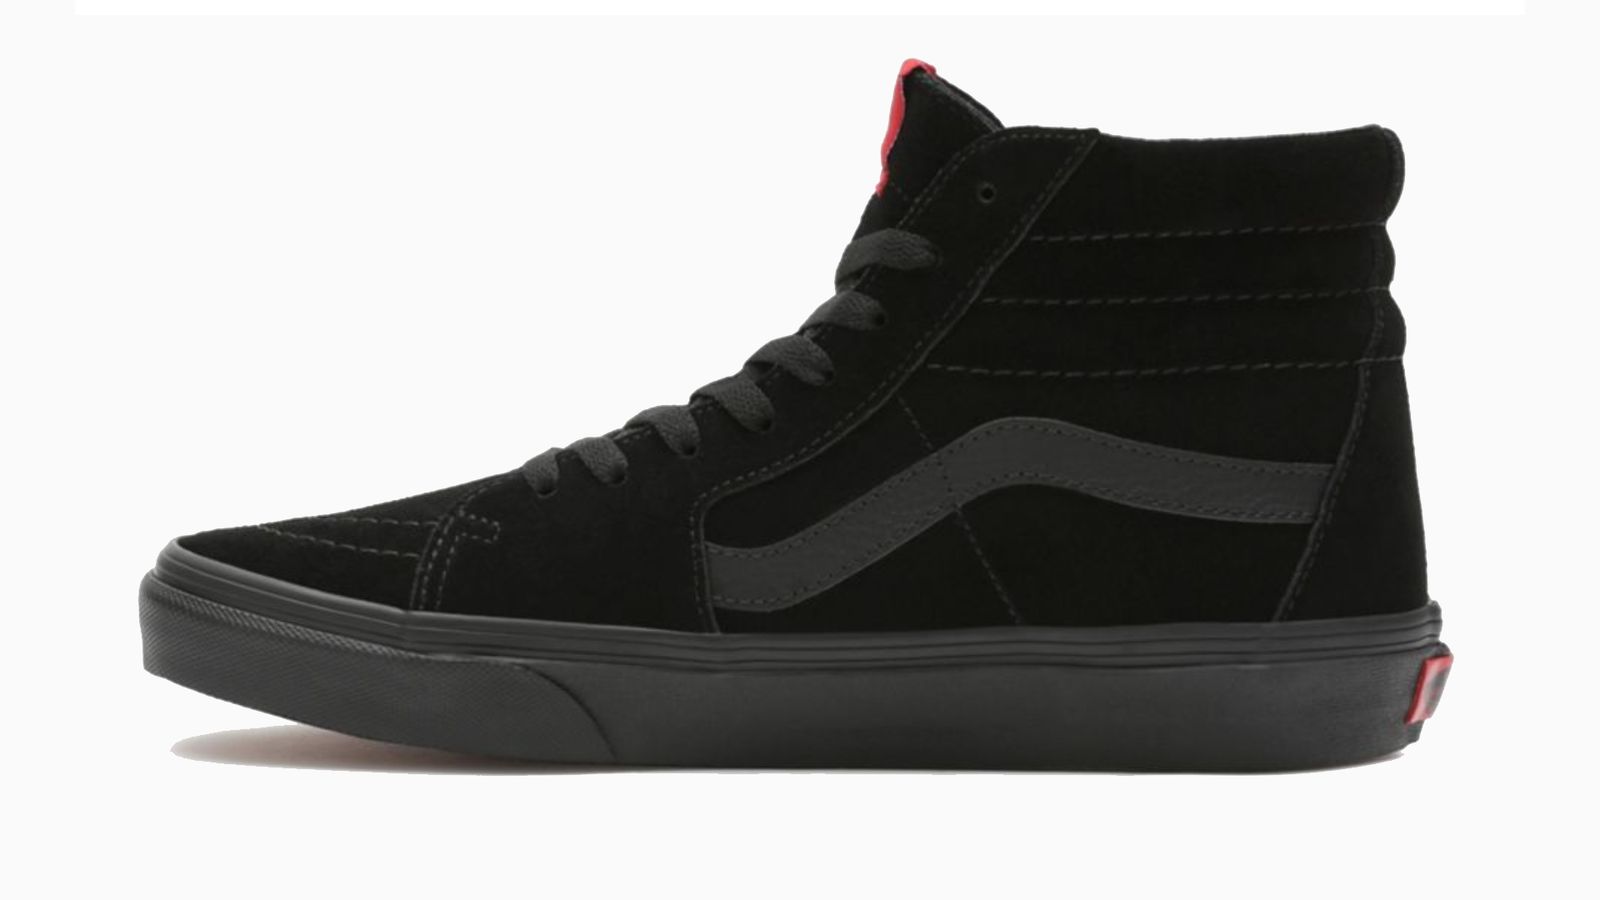 Vans Sk8 Hi product image of a black Vans high-top featuring red branding on the heel and tongue.